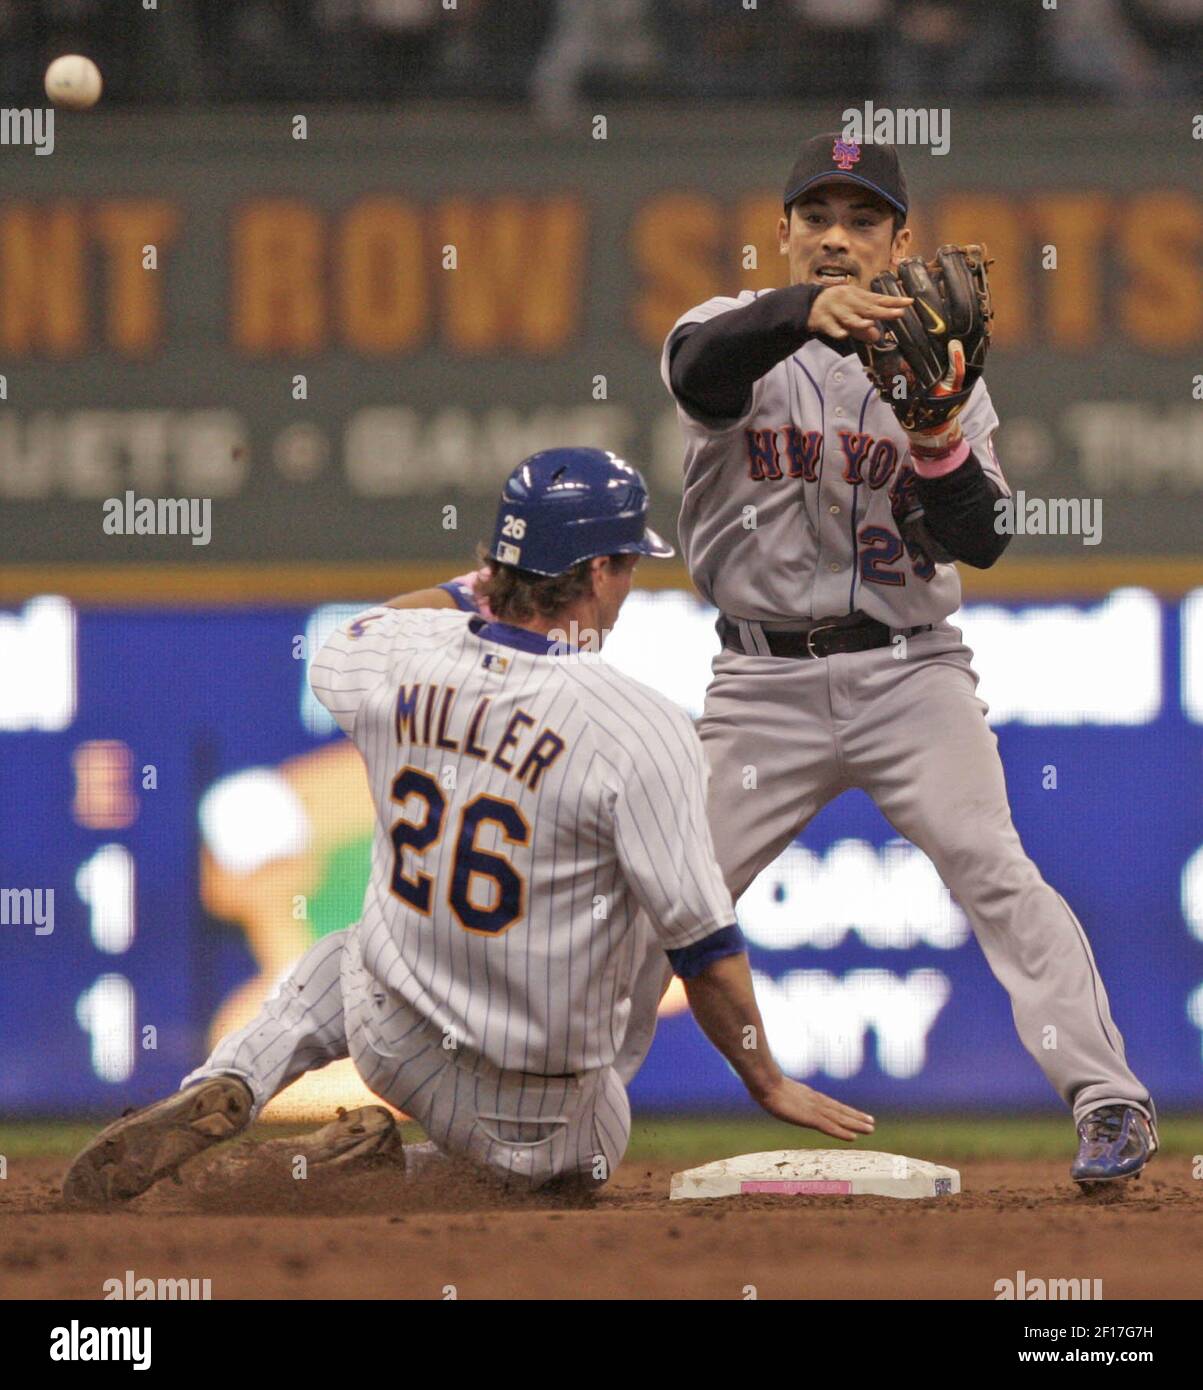 The New York Mets' Kazuo Matsui makes the throw over the Milwukee Brewers' Damian Miller for the double play in the seventh inning in Milwaukee, Wisconsin, on Sunday, May 14, 2006. (Photo by Mary Jo Walicki/Milwaukee Journal Sentinel/KRT) Stock Photo